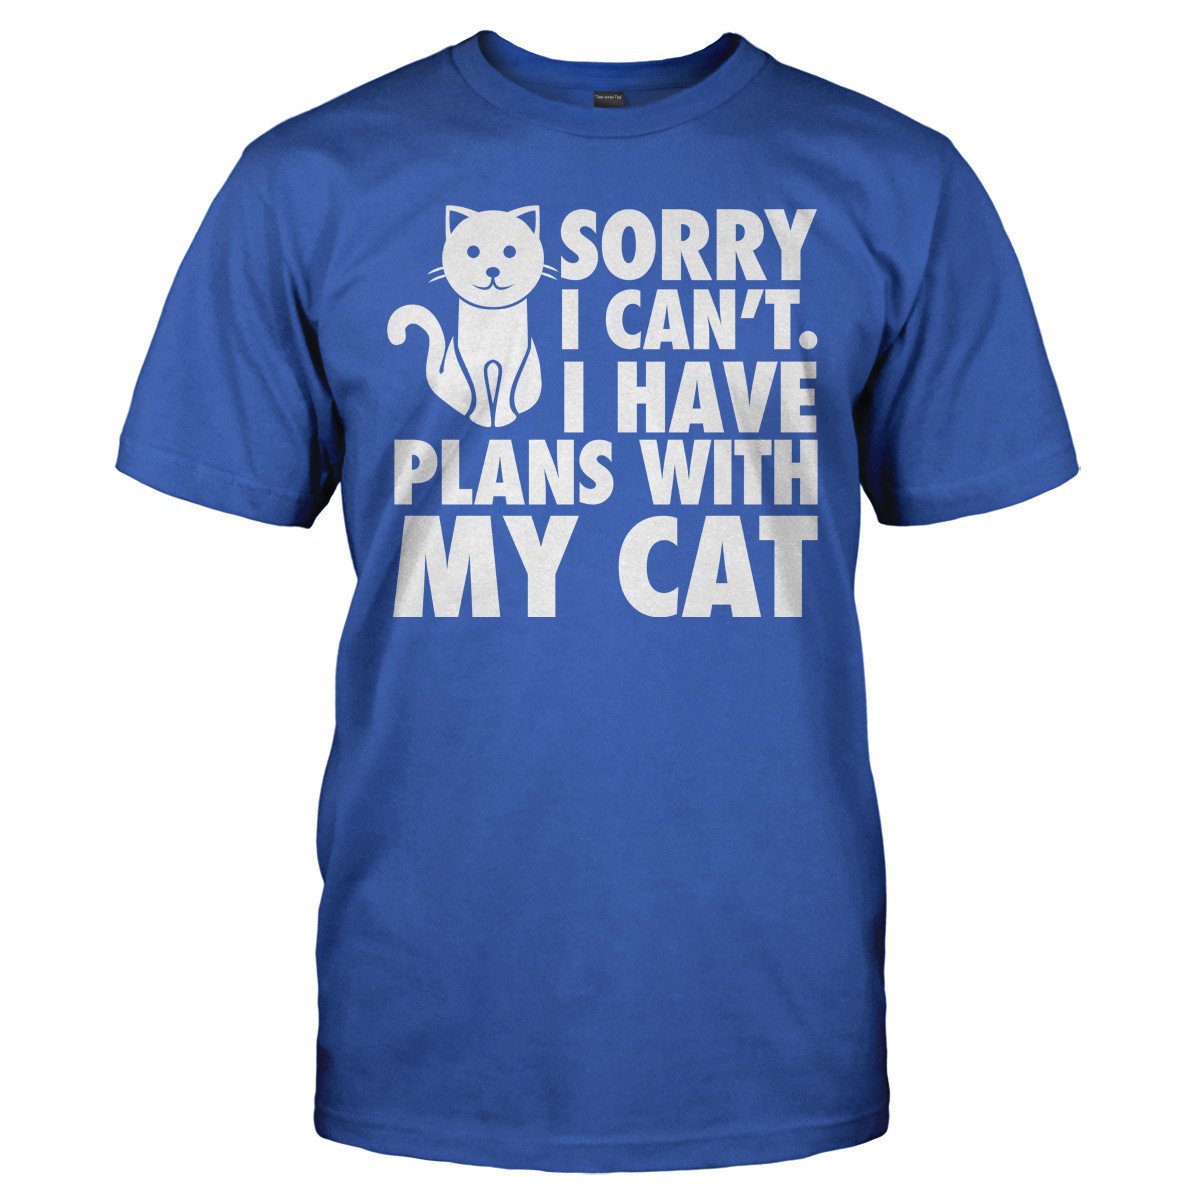 I Have Plans With My Cat T-Shirt & Hoodie | I Love Apparel